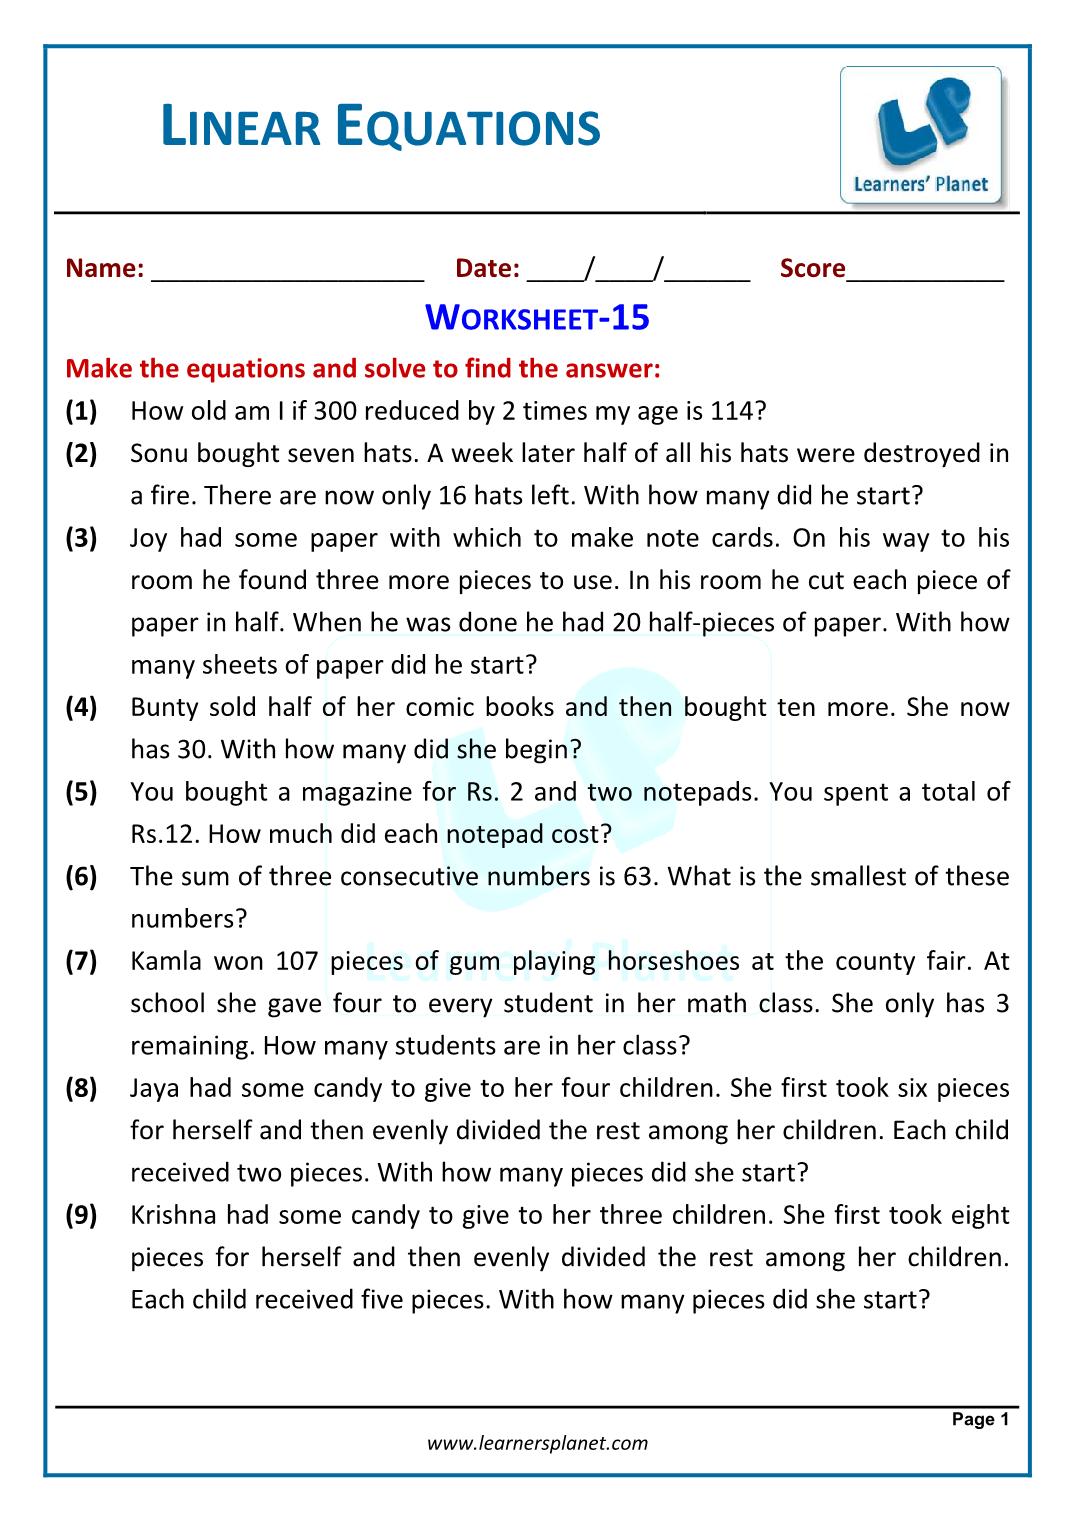 Linear equation word problems worksheet with answer Regarding Linear Equation Word Problems Worksheet